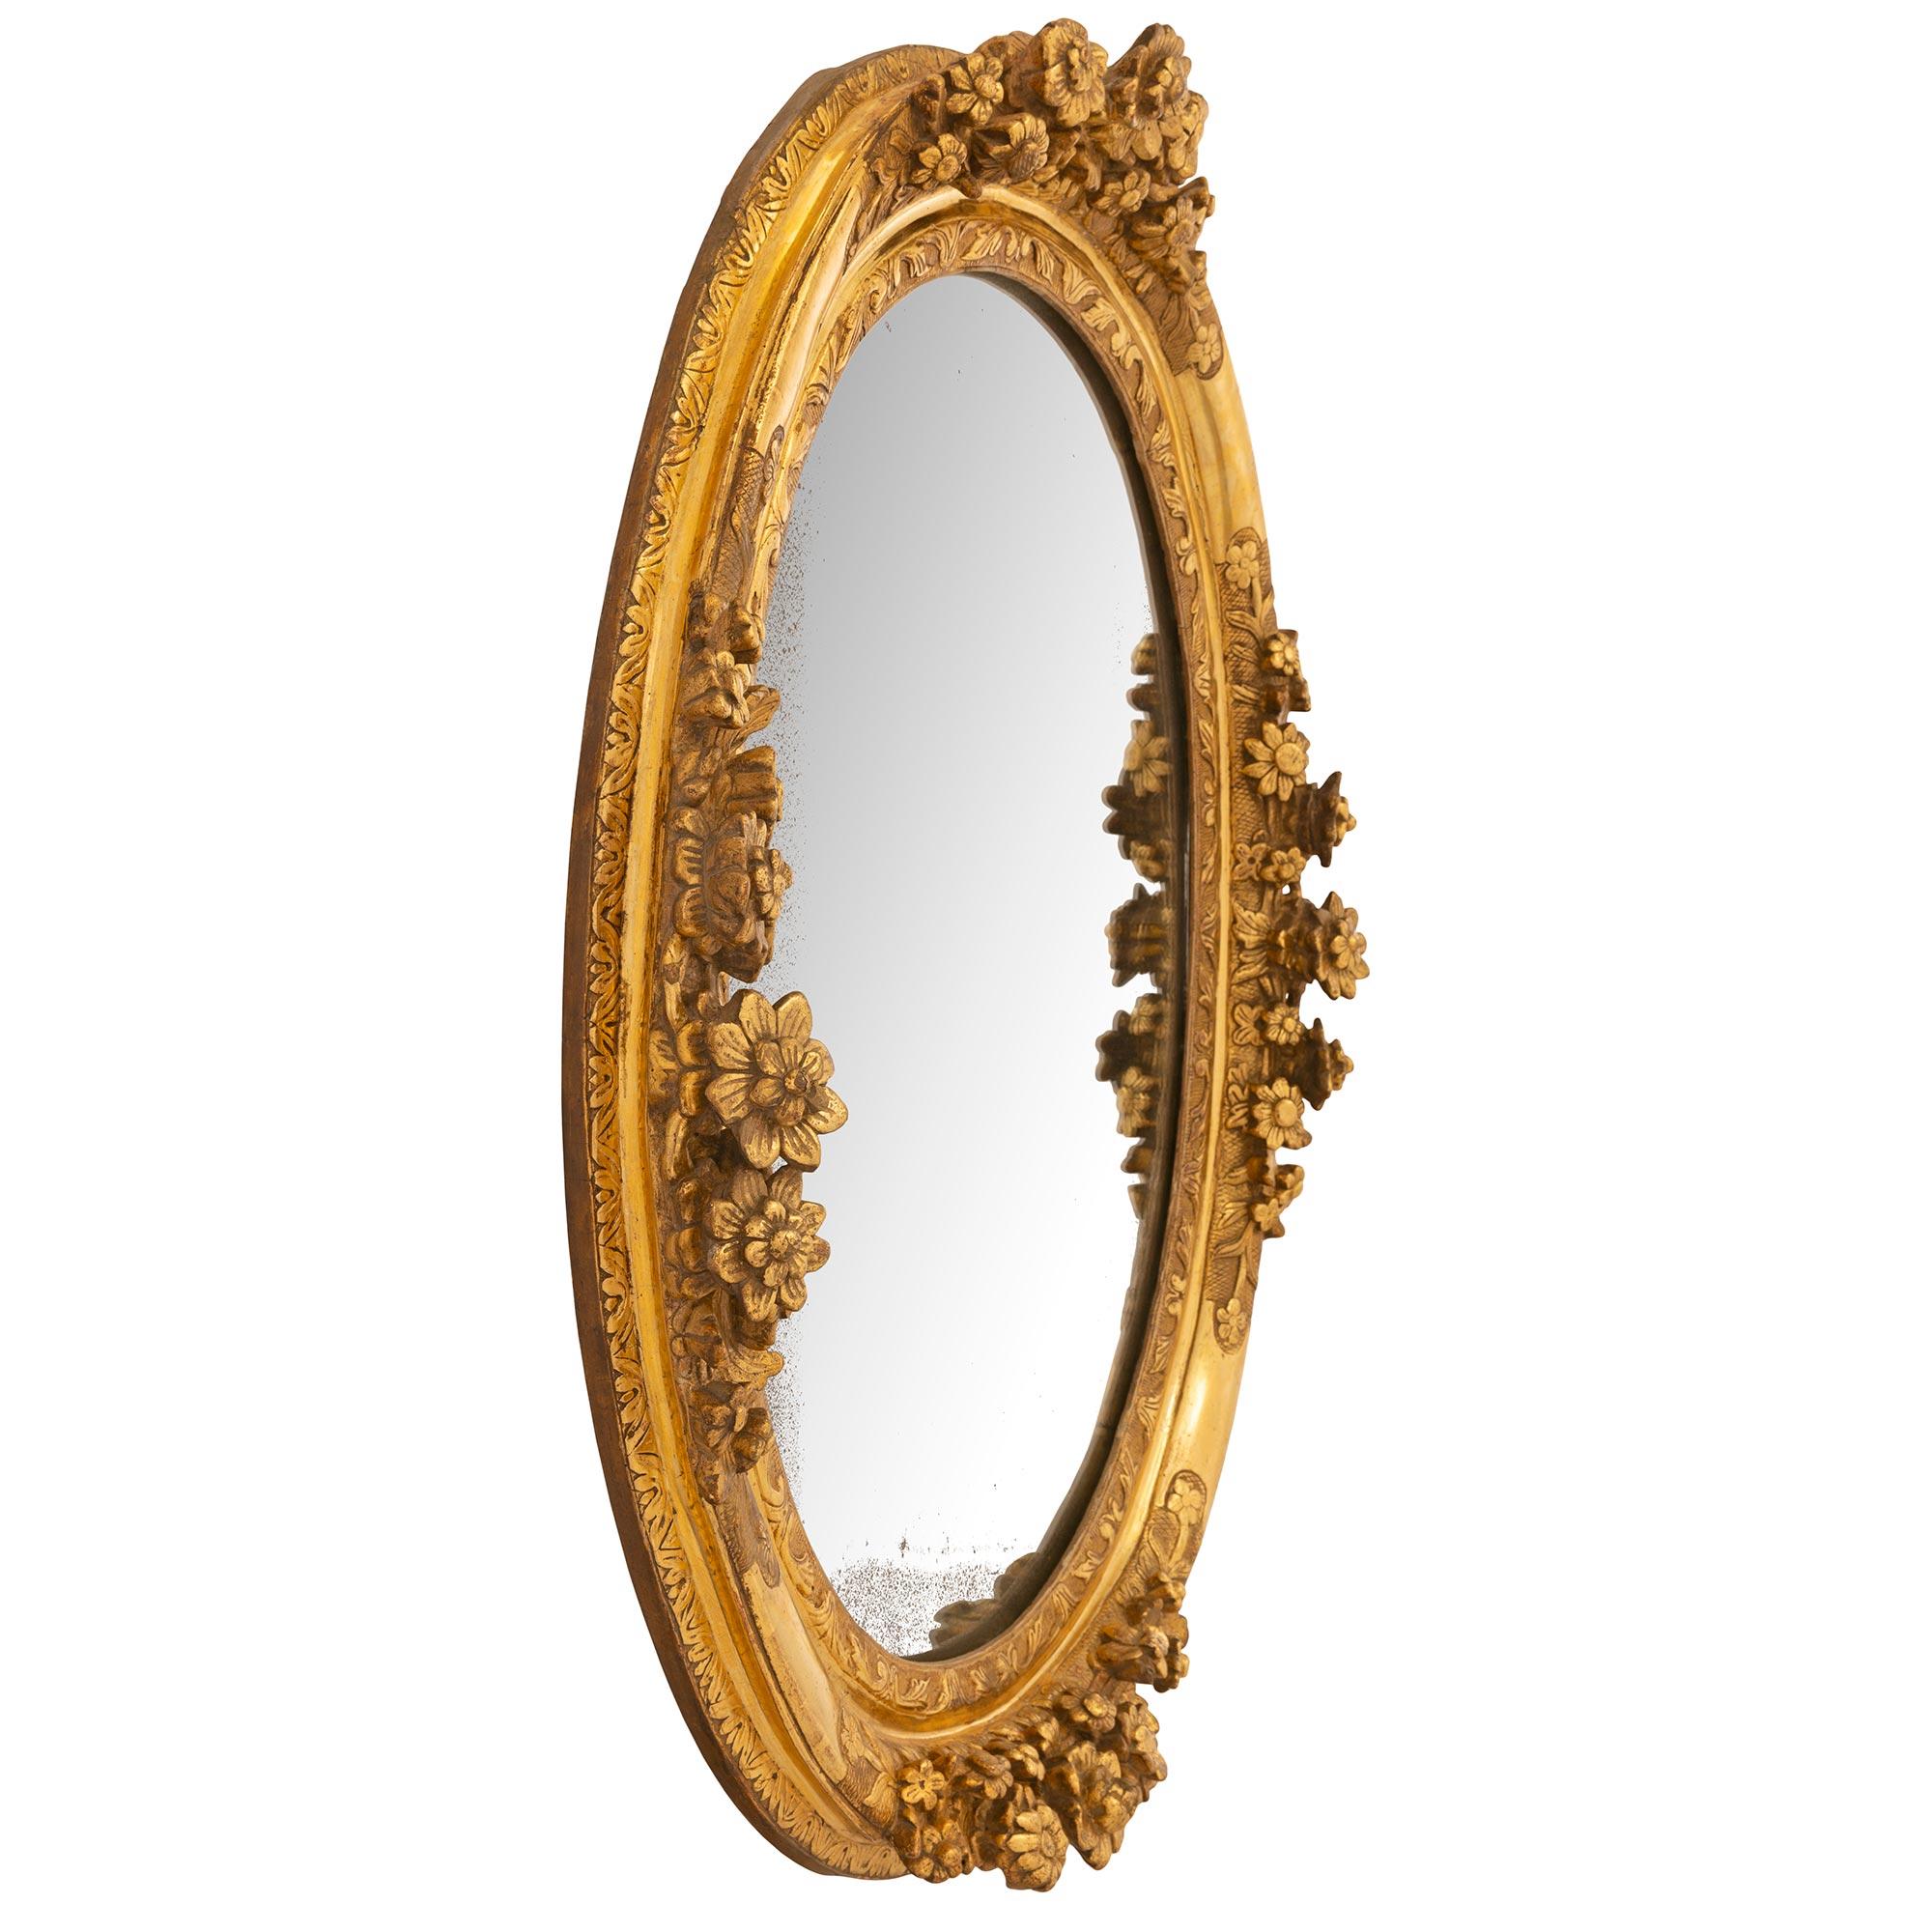 A most attractive French early 18th century Louis XIV Period Giltwood mirror In Good Condition For Sale In West Palm Beach, FL